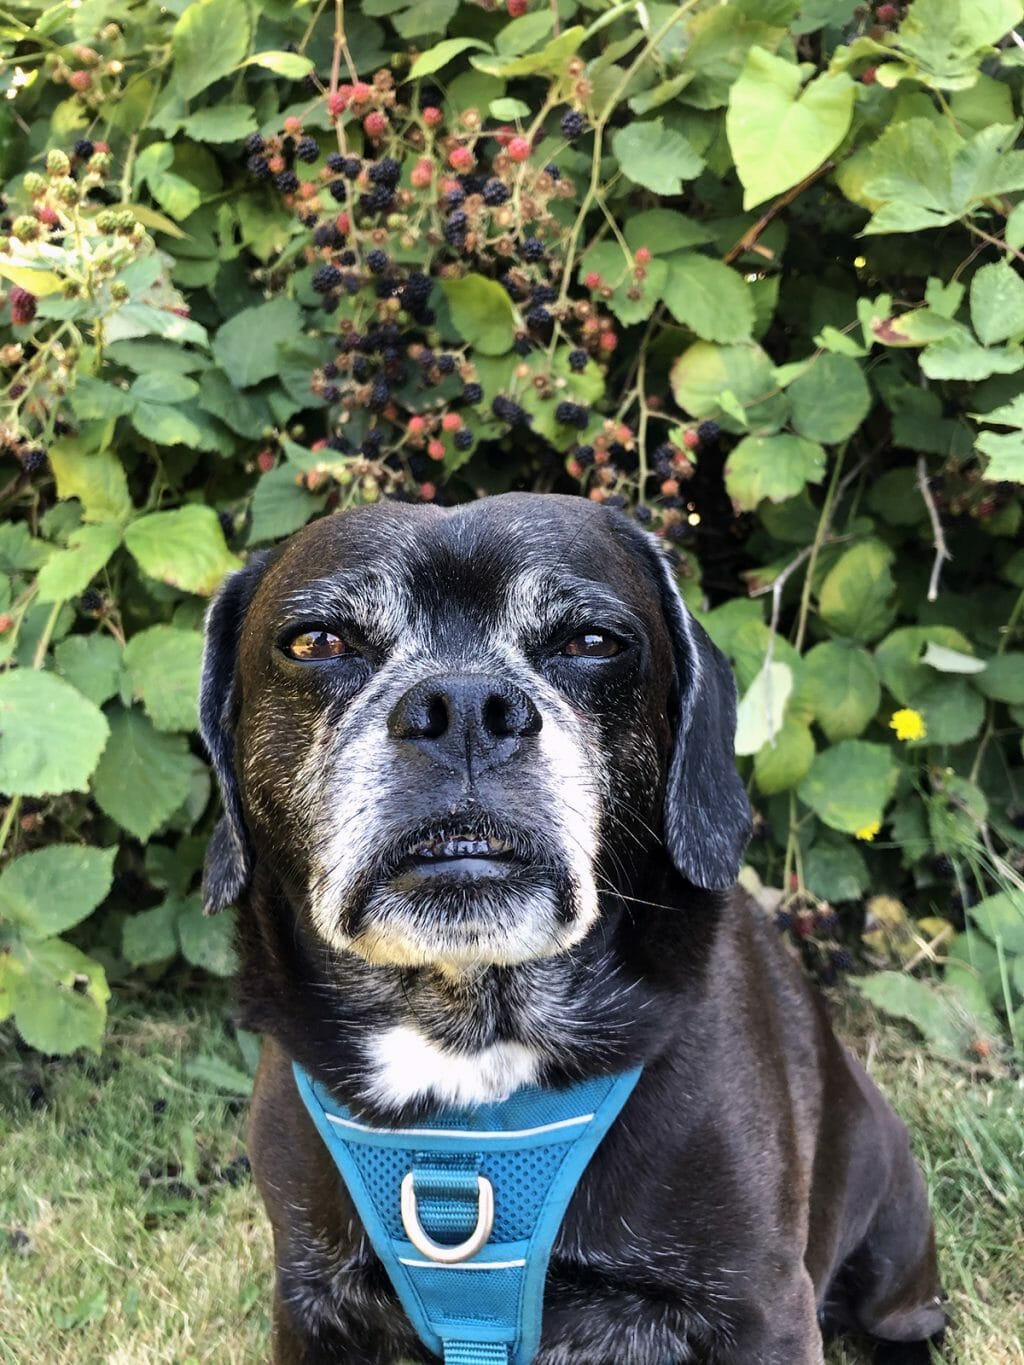 a black puggle sits in front of a large overgrown blackberry bush filled with ripe berries.